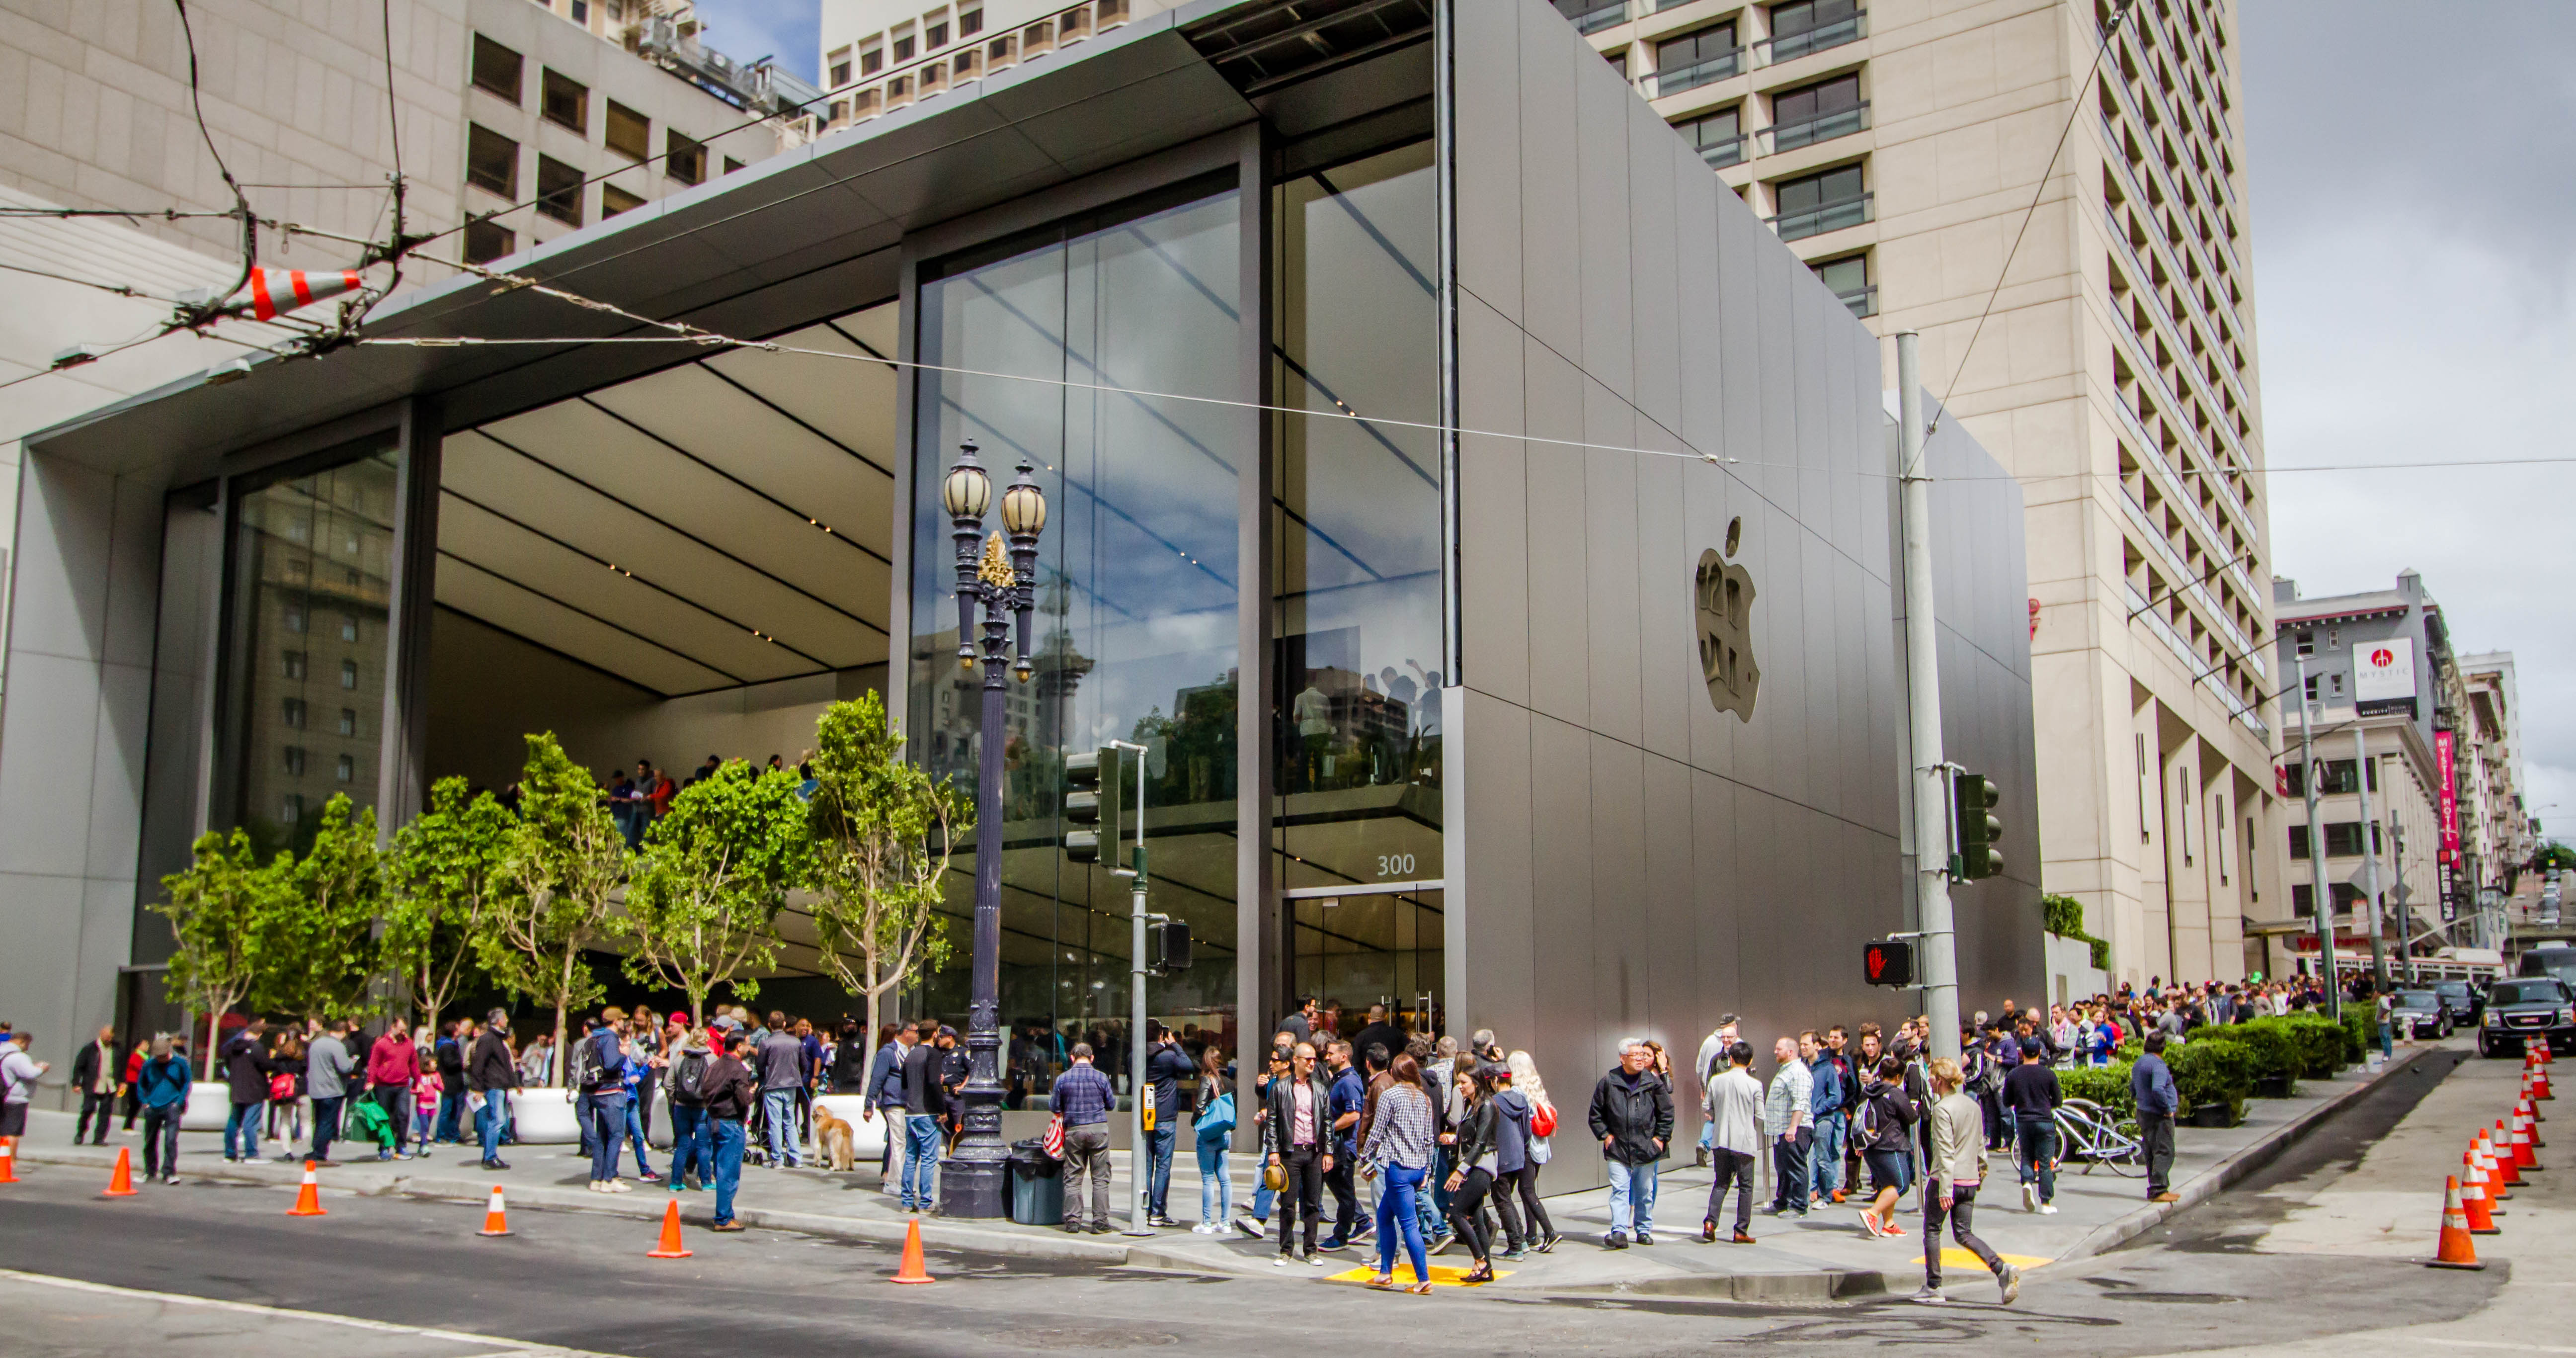 A photo of Apple's new retail store in downtown San Francisco, Calif. on May 21, 2016.